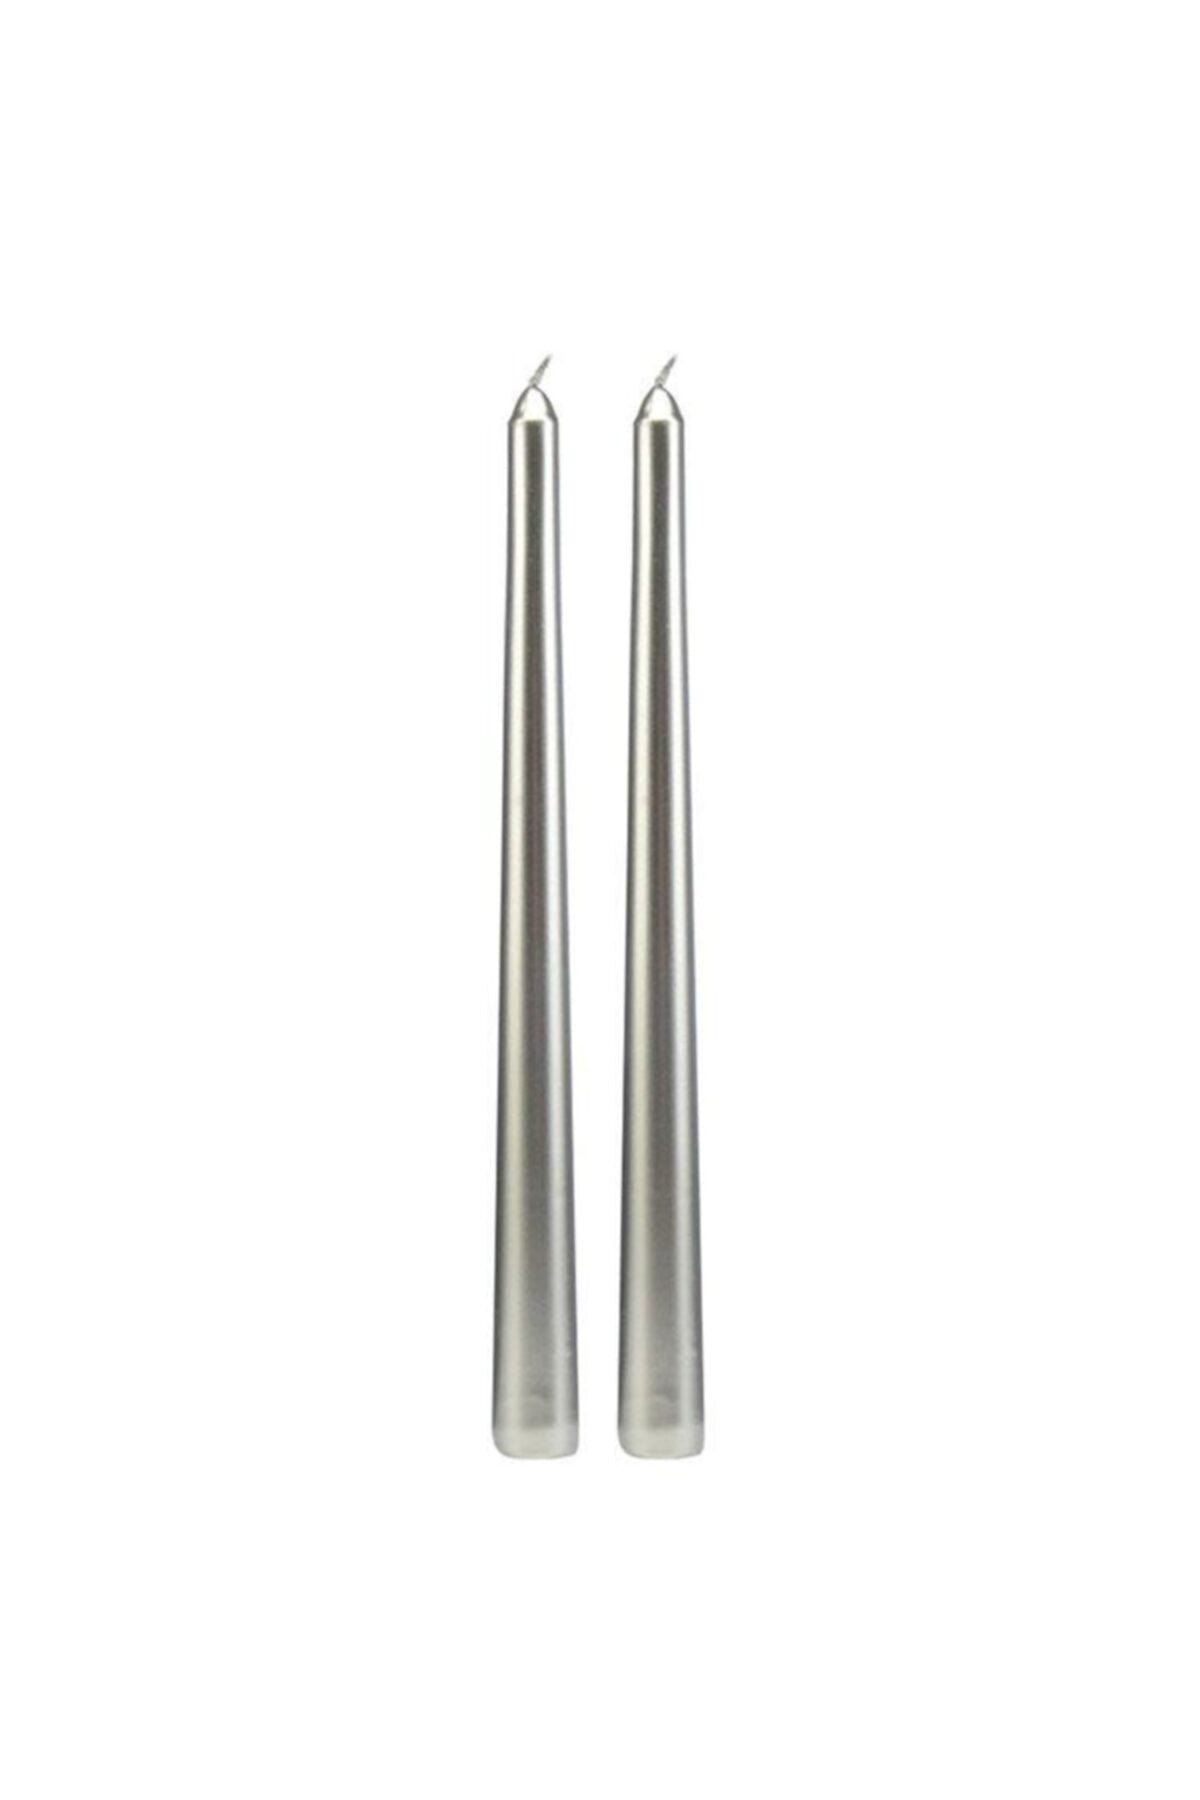 10 metallic silver color conical candlestick candle